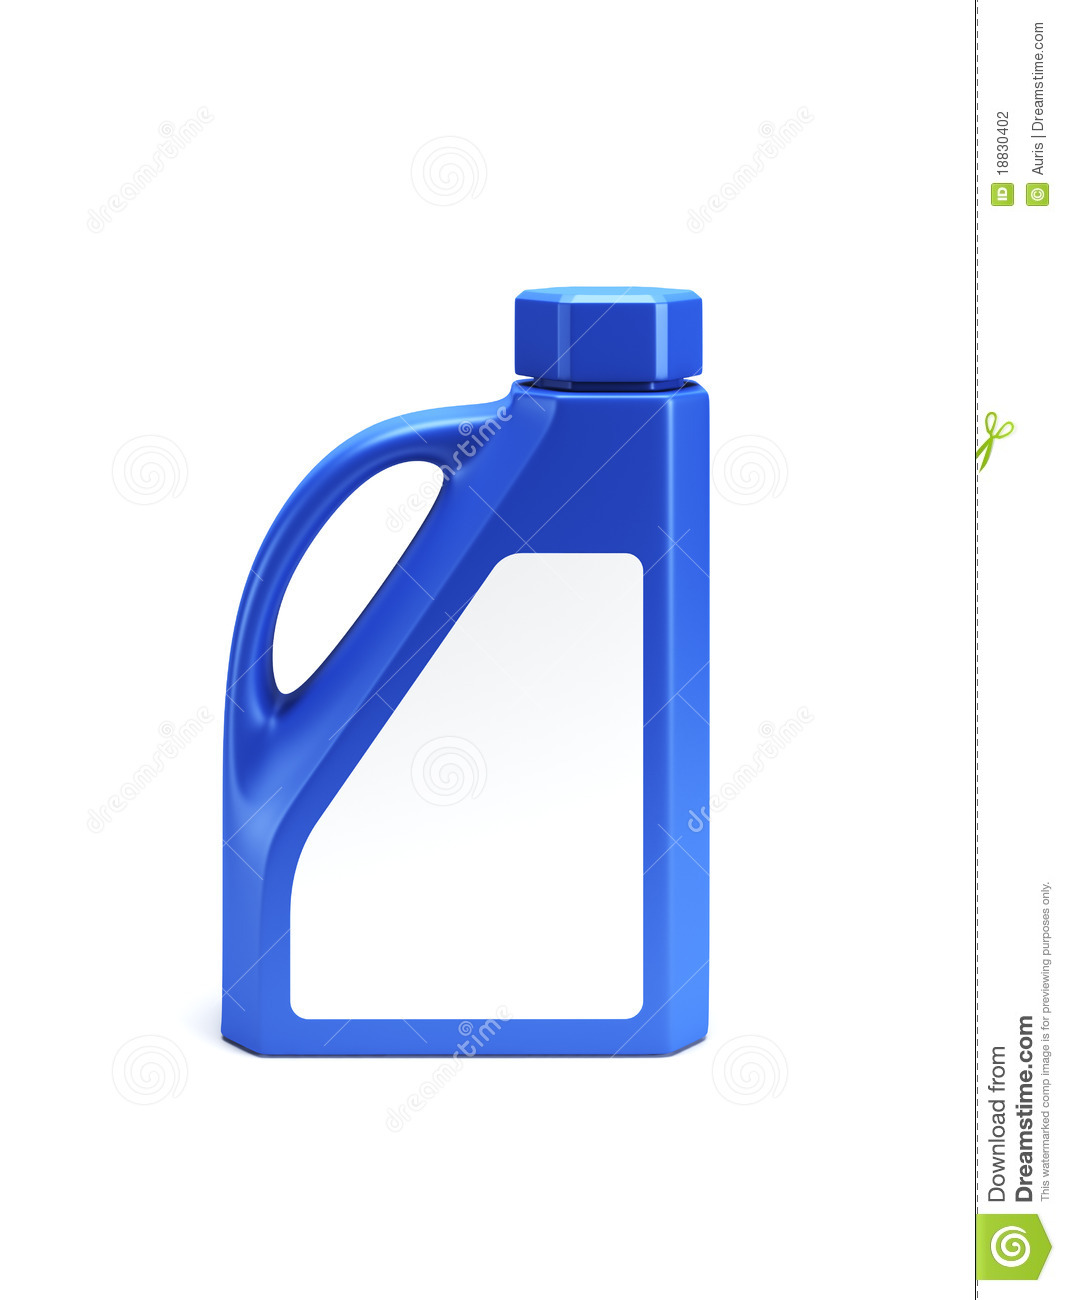 Motor Oil Bottle Isolated 3d Stock Photography   Image  18830402